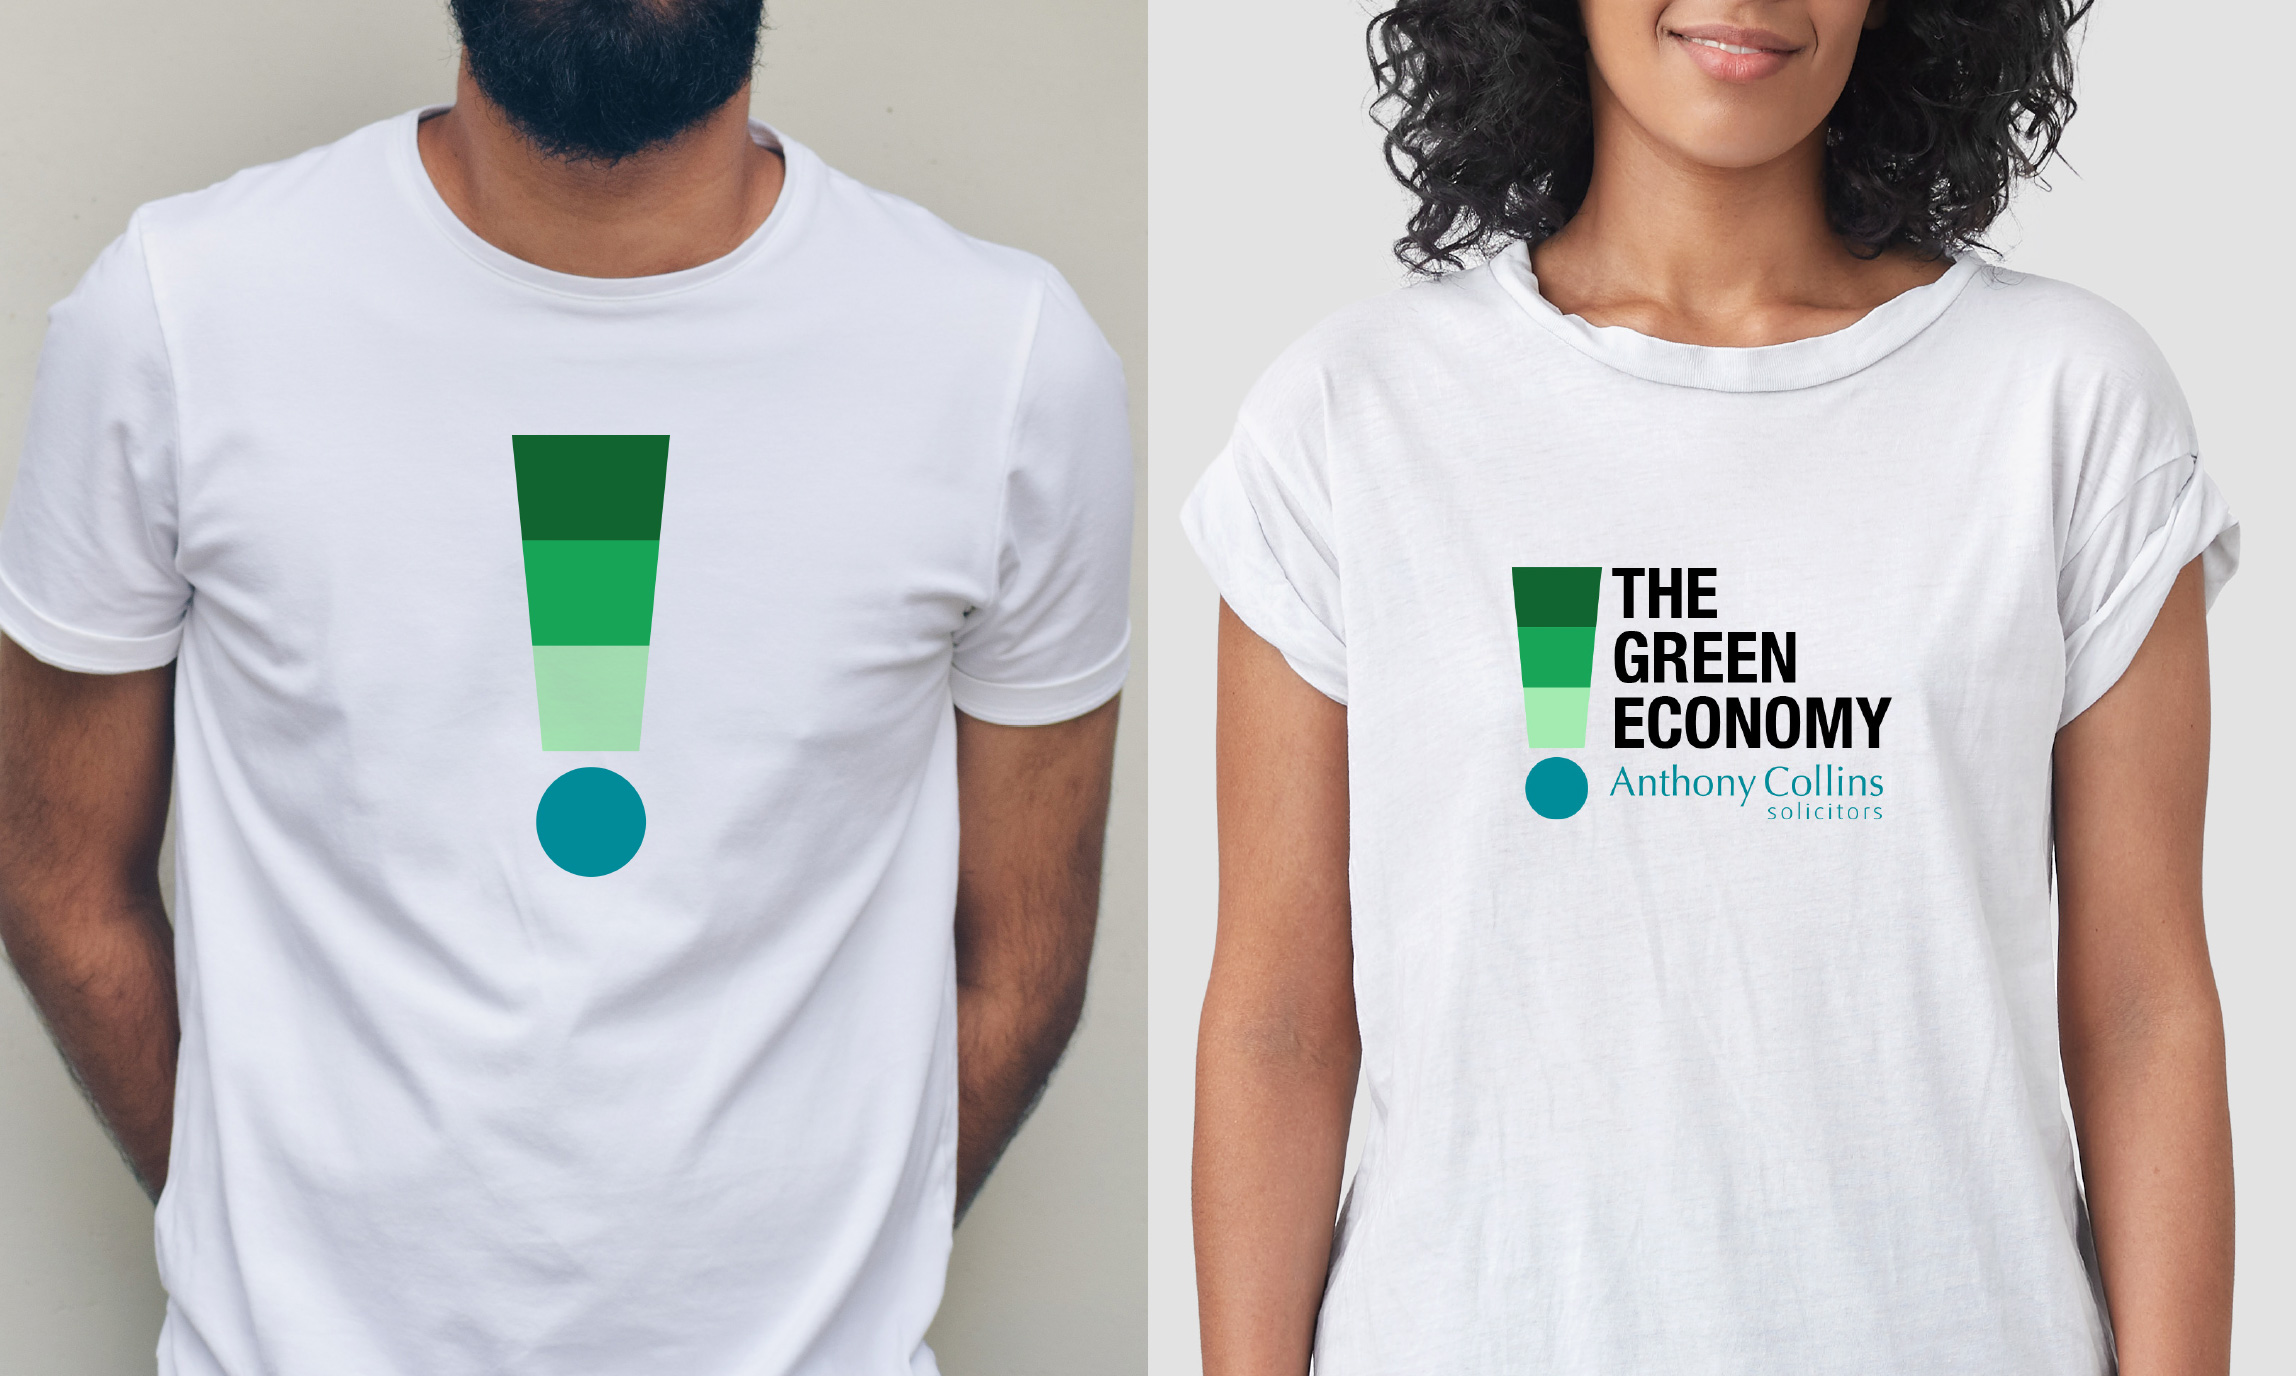 Anthony Collins Solicitors The Green Economy COP26 logo t-shirts